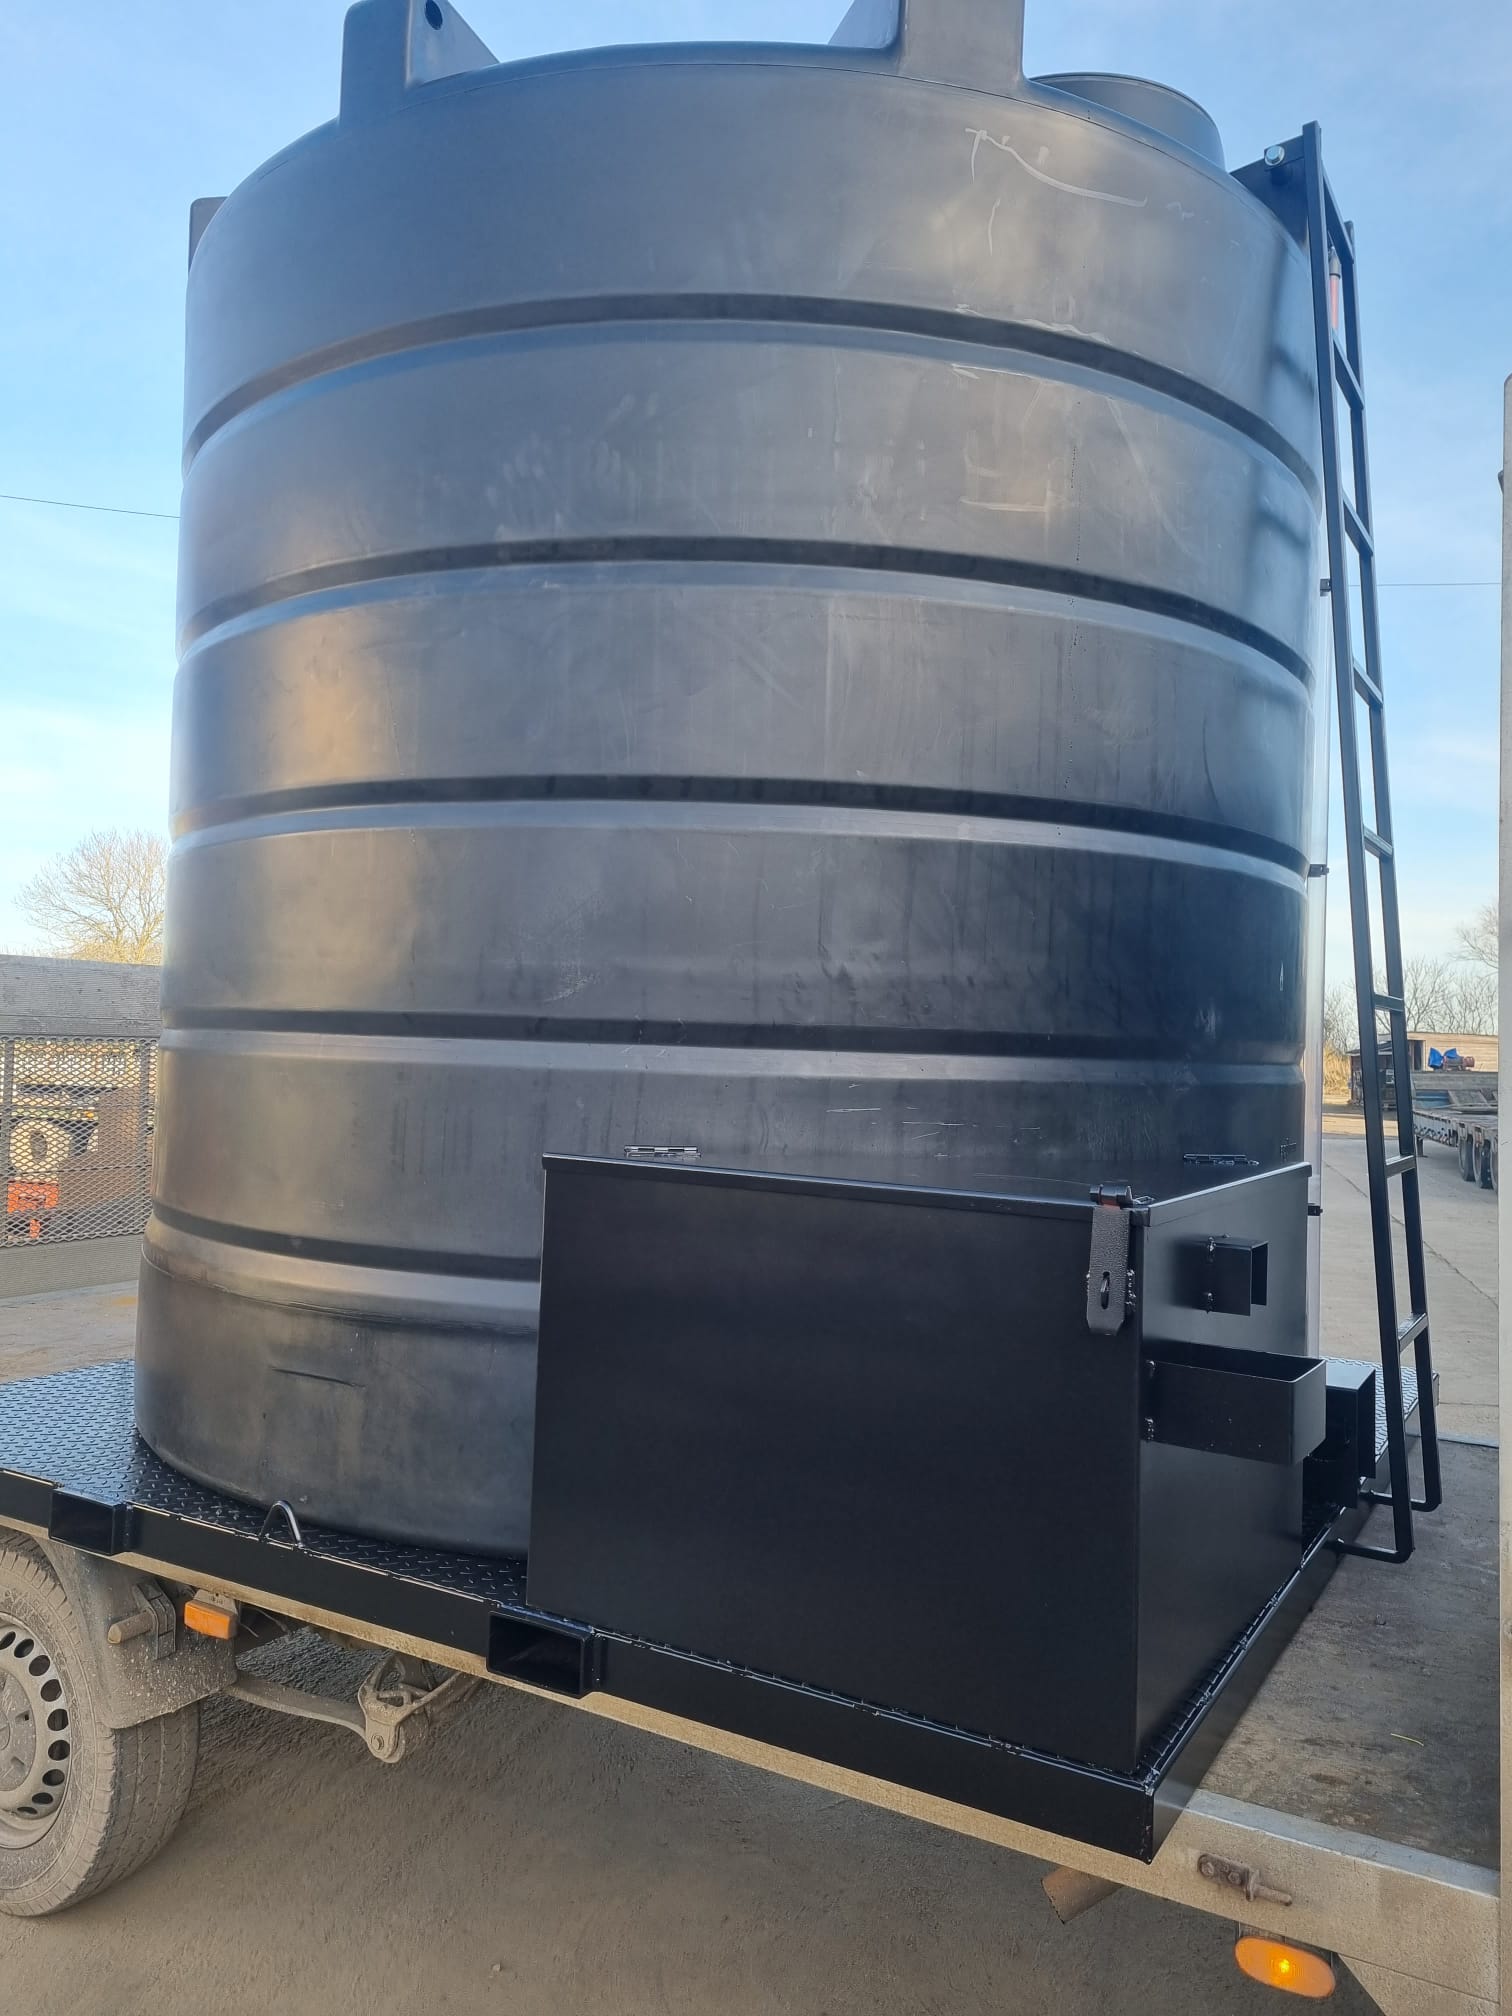 10,000ltr Water Tank, With On Demand Pump To Hire In Peterborough